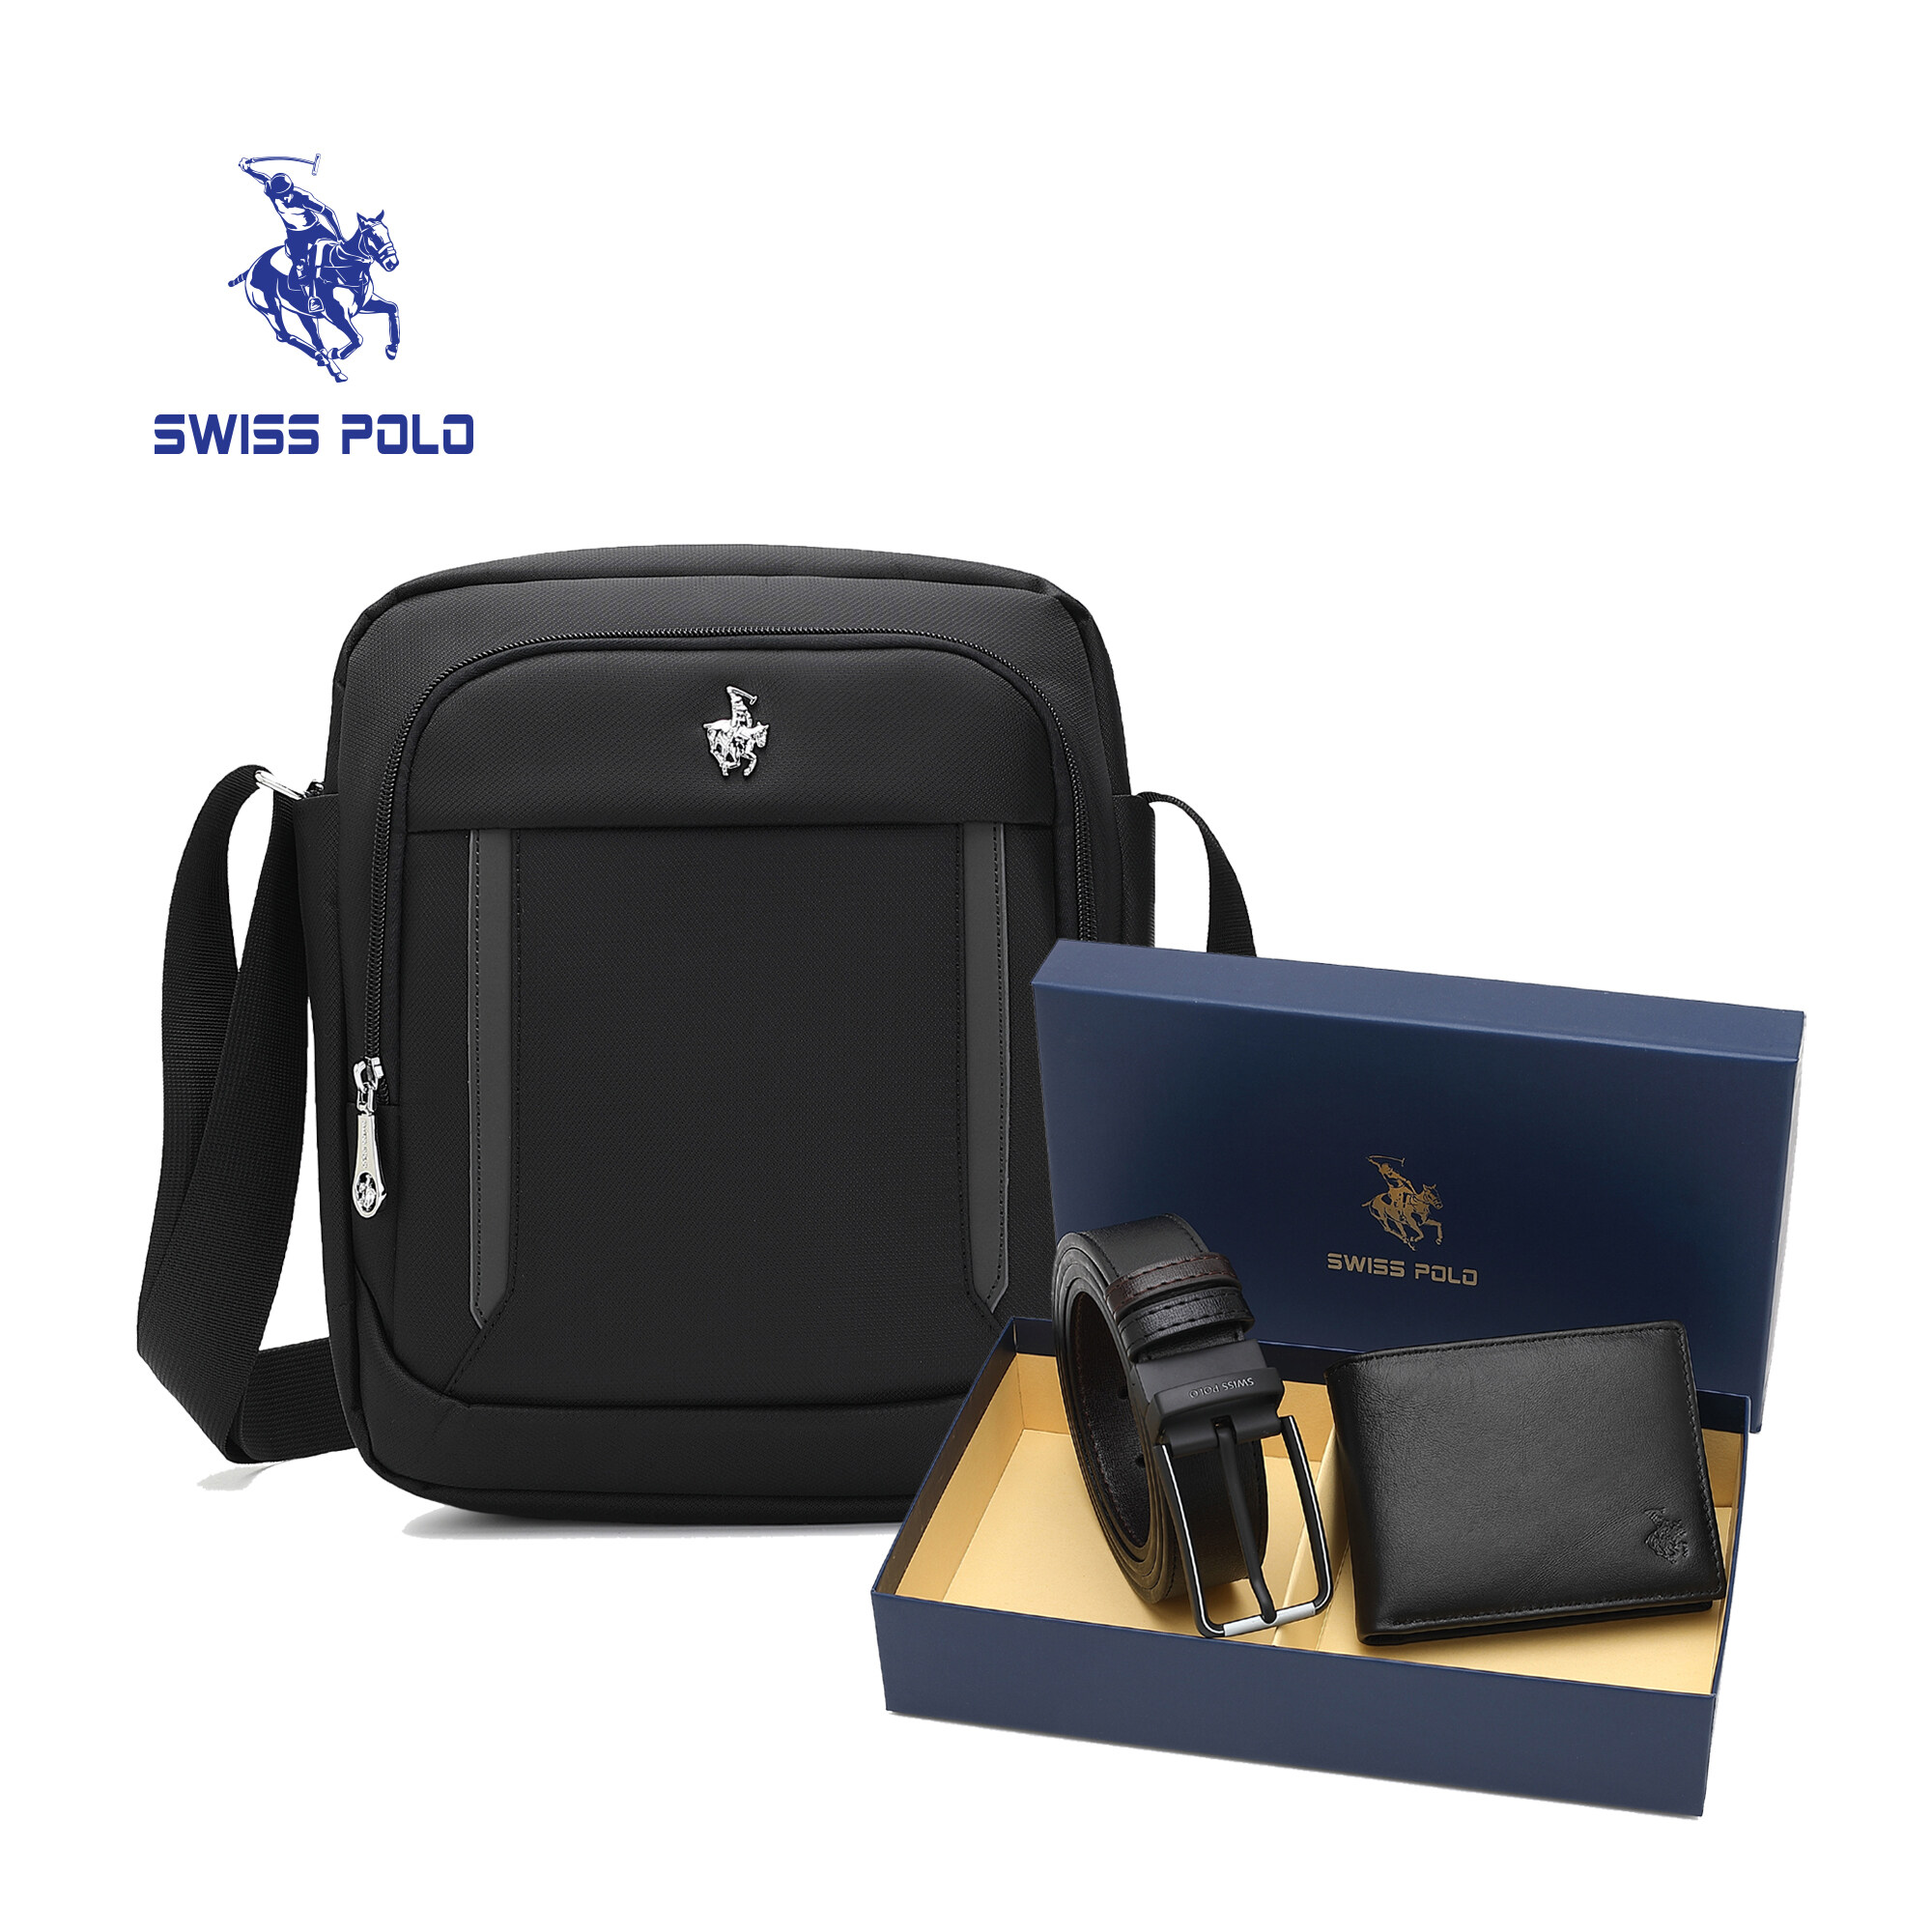 SWISS POLO Gift Set/ Box Chestbag And Genuine Leather Bifold Wallet With Belt SGS 563-3 BLUE/GREY